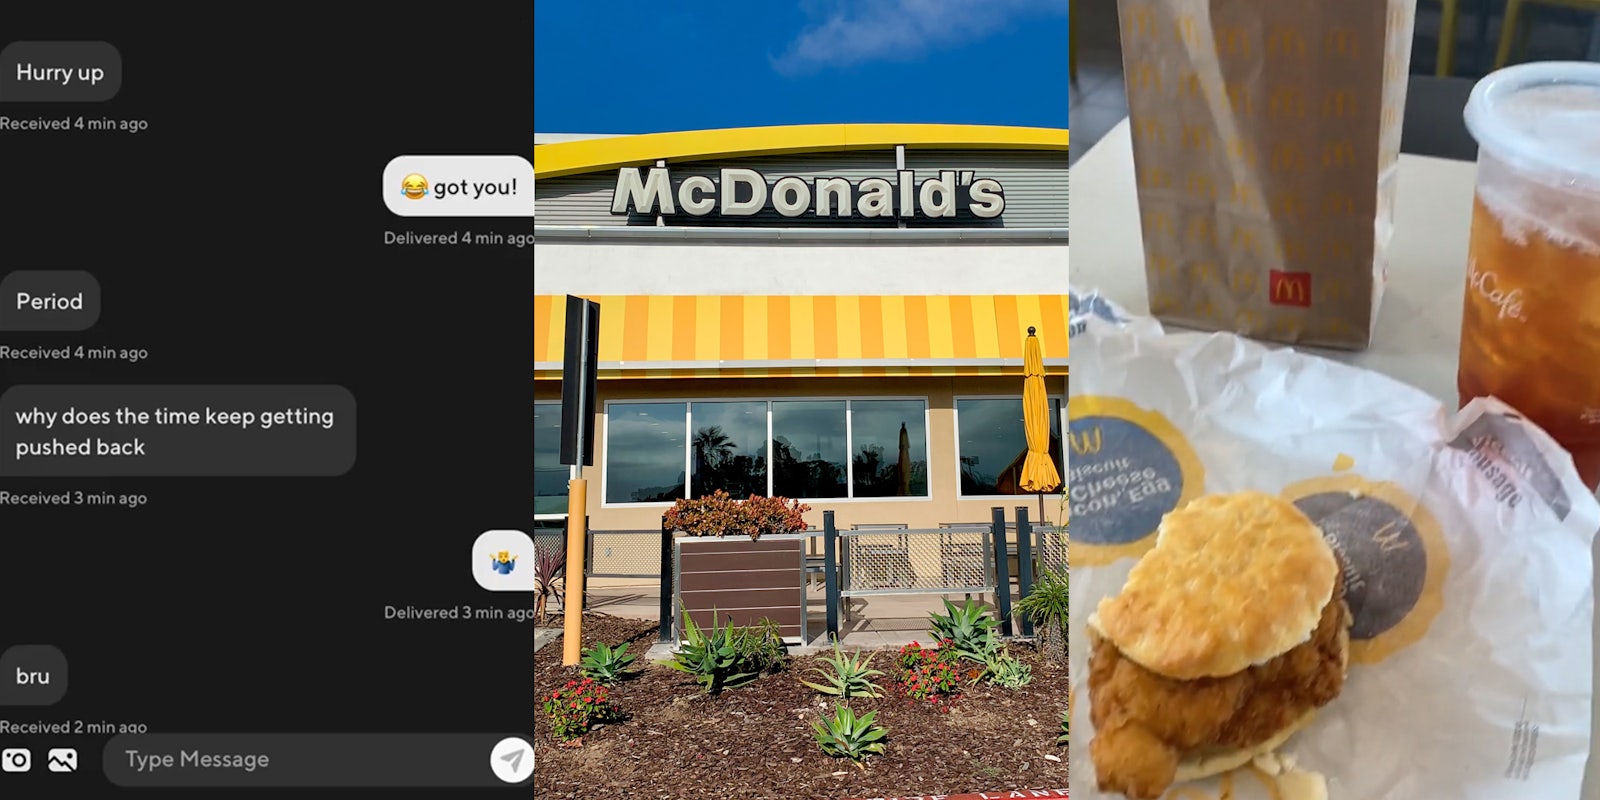 DoorDash chat messages between customer and driver 'Hurry up got you! Period why does the time keep getting pushed back bru' (l) McDonald's building with sign (c) McDonald's food with drink and bag (r)